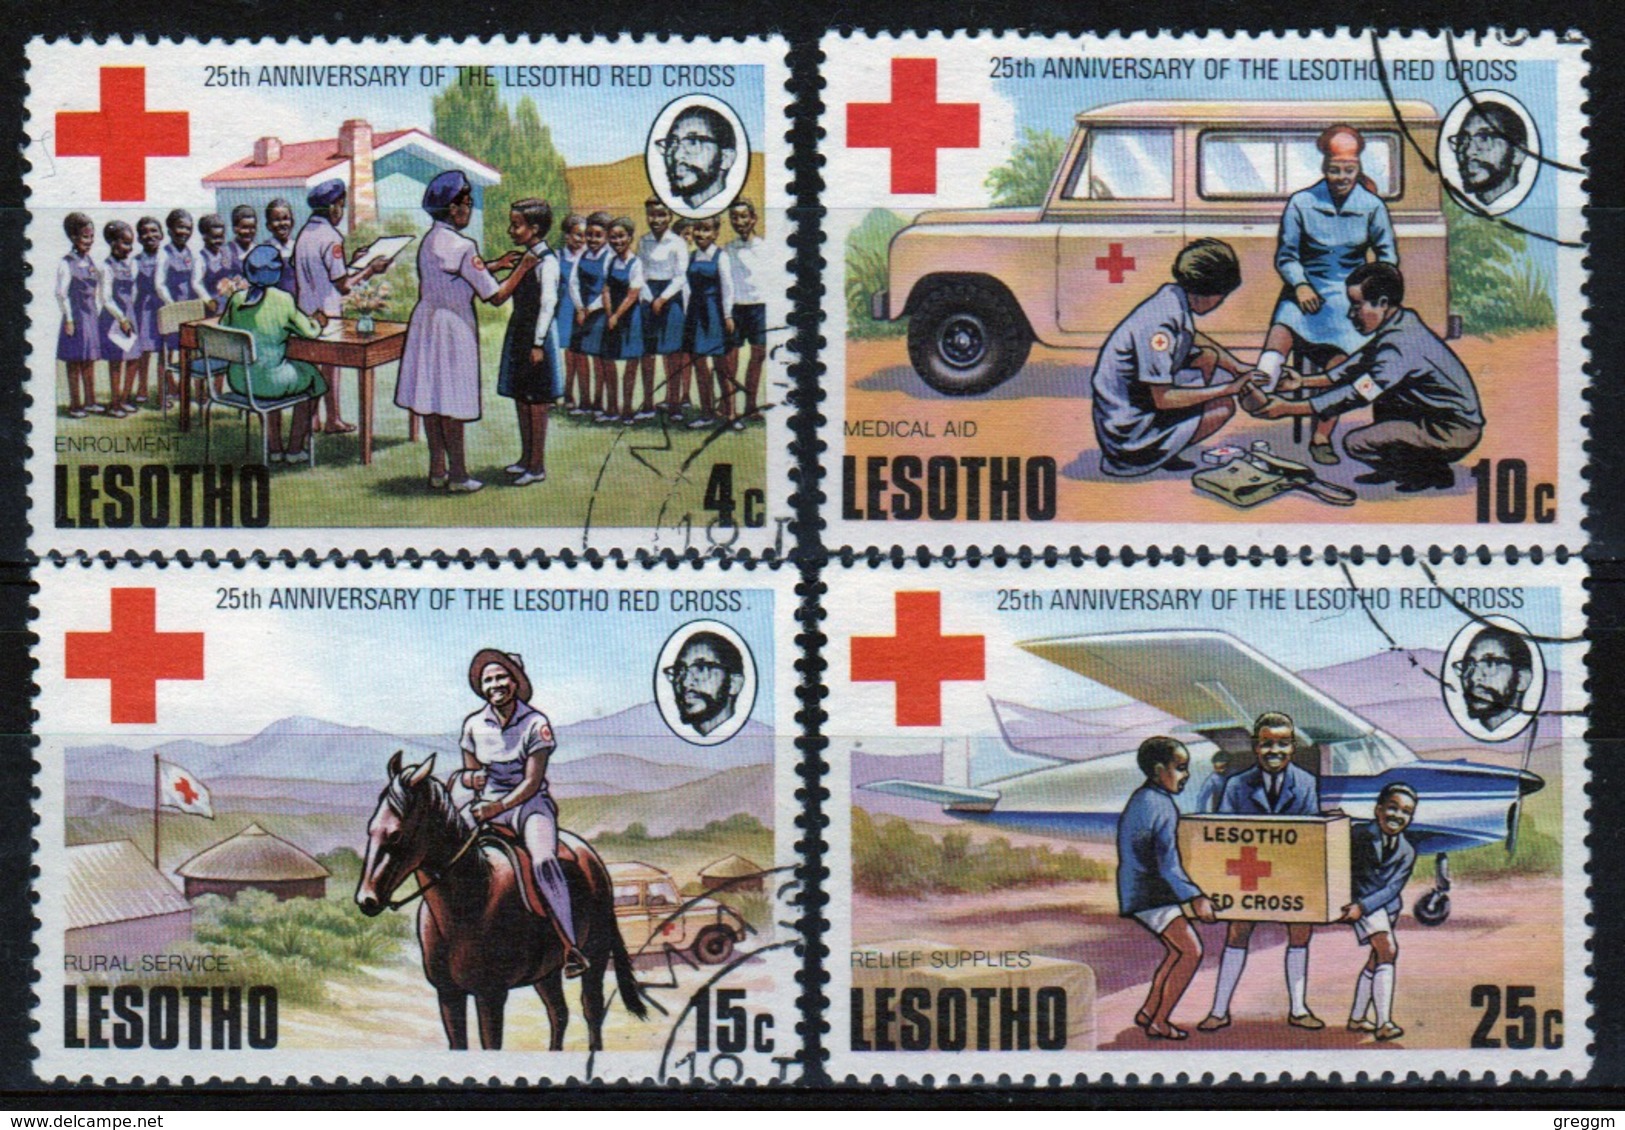 Red Cross Lesotho 1976 Set Of Stamps Celebrating 25th Anniversary Of Lesotho Red Cross. - Red Cross